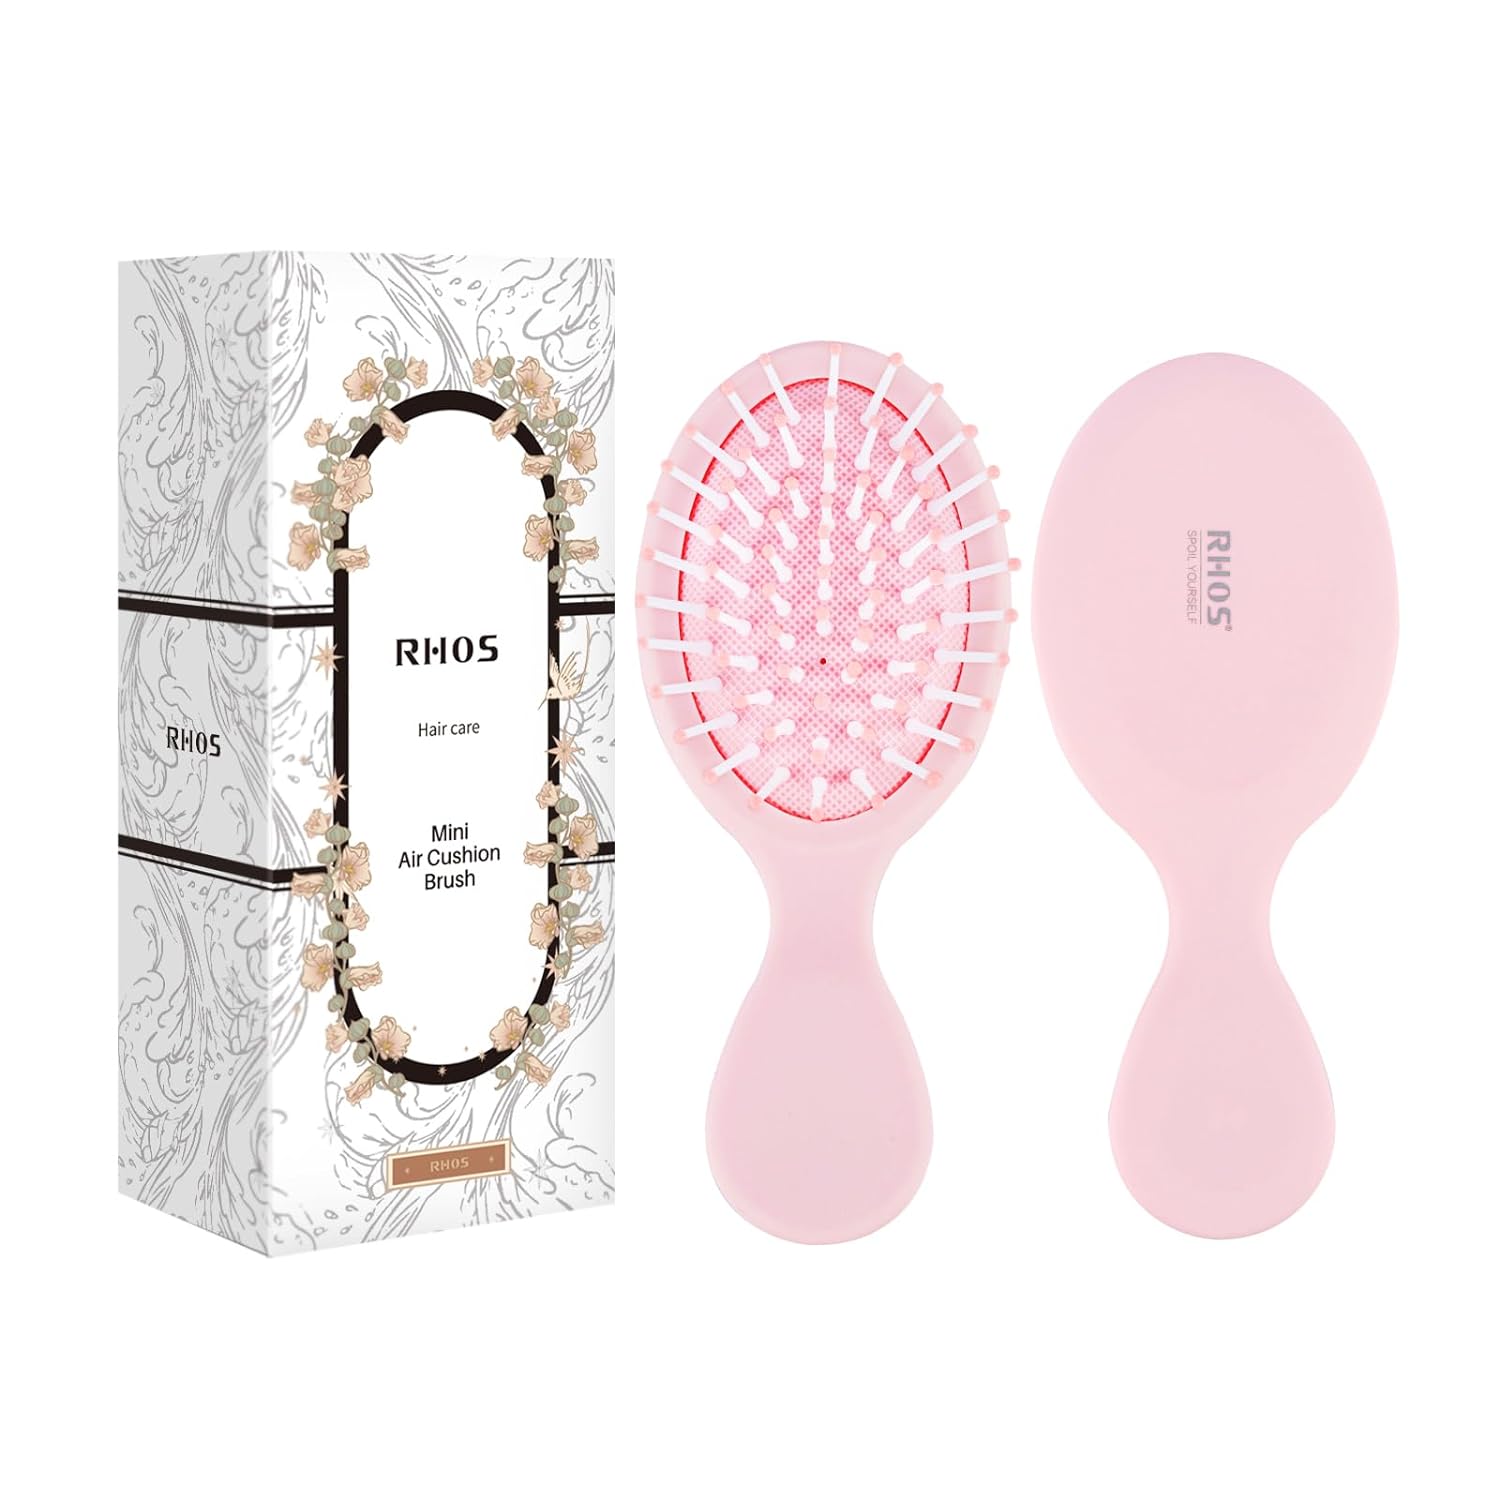 I have very curly hair so I can sometimes struggle to find a hairbrush whos tines don't end up getting caught and broken in my hair. This hairbrush has lasted through multiple trips without any issues, is the perfect compact size in that is is small but doesn't feel awkward to use as a hairbrush, and also comes in a number of cute colors. Definitely recommend!